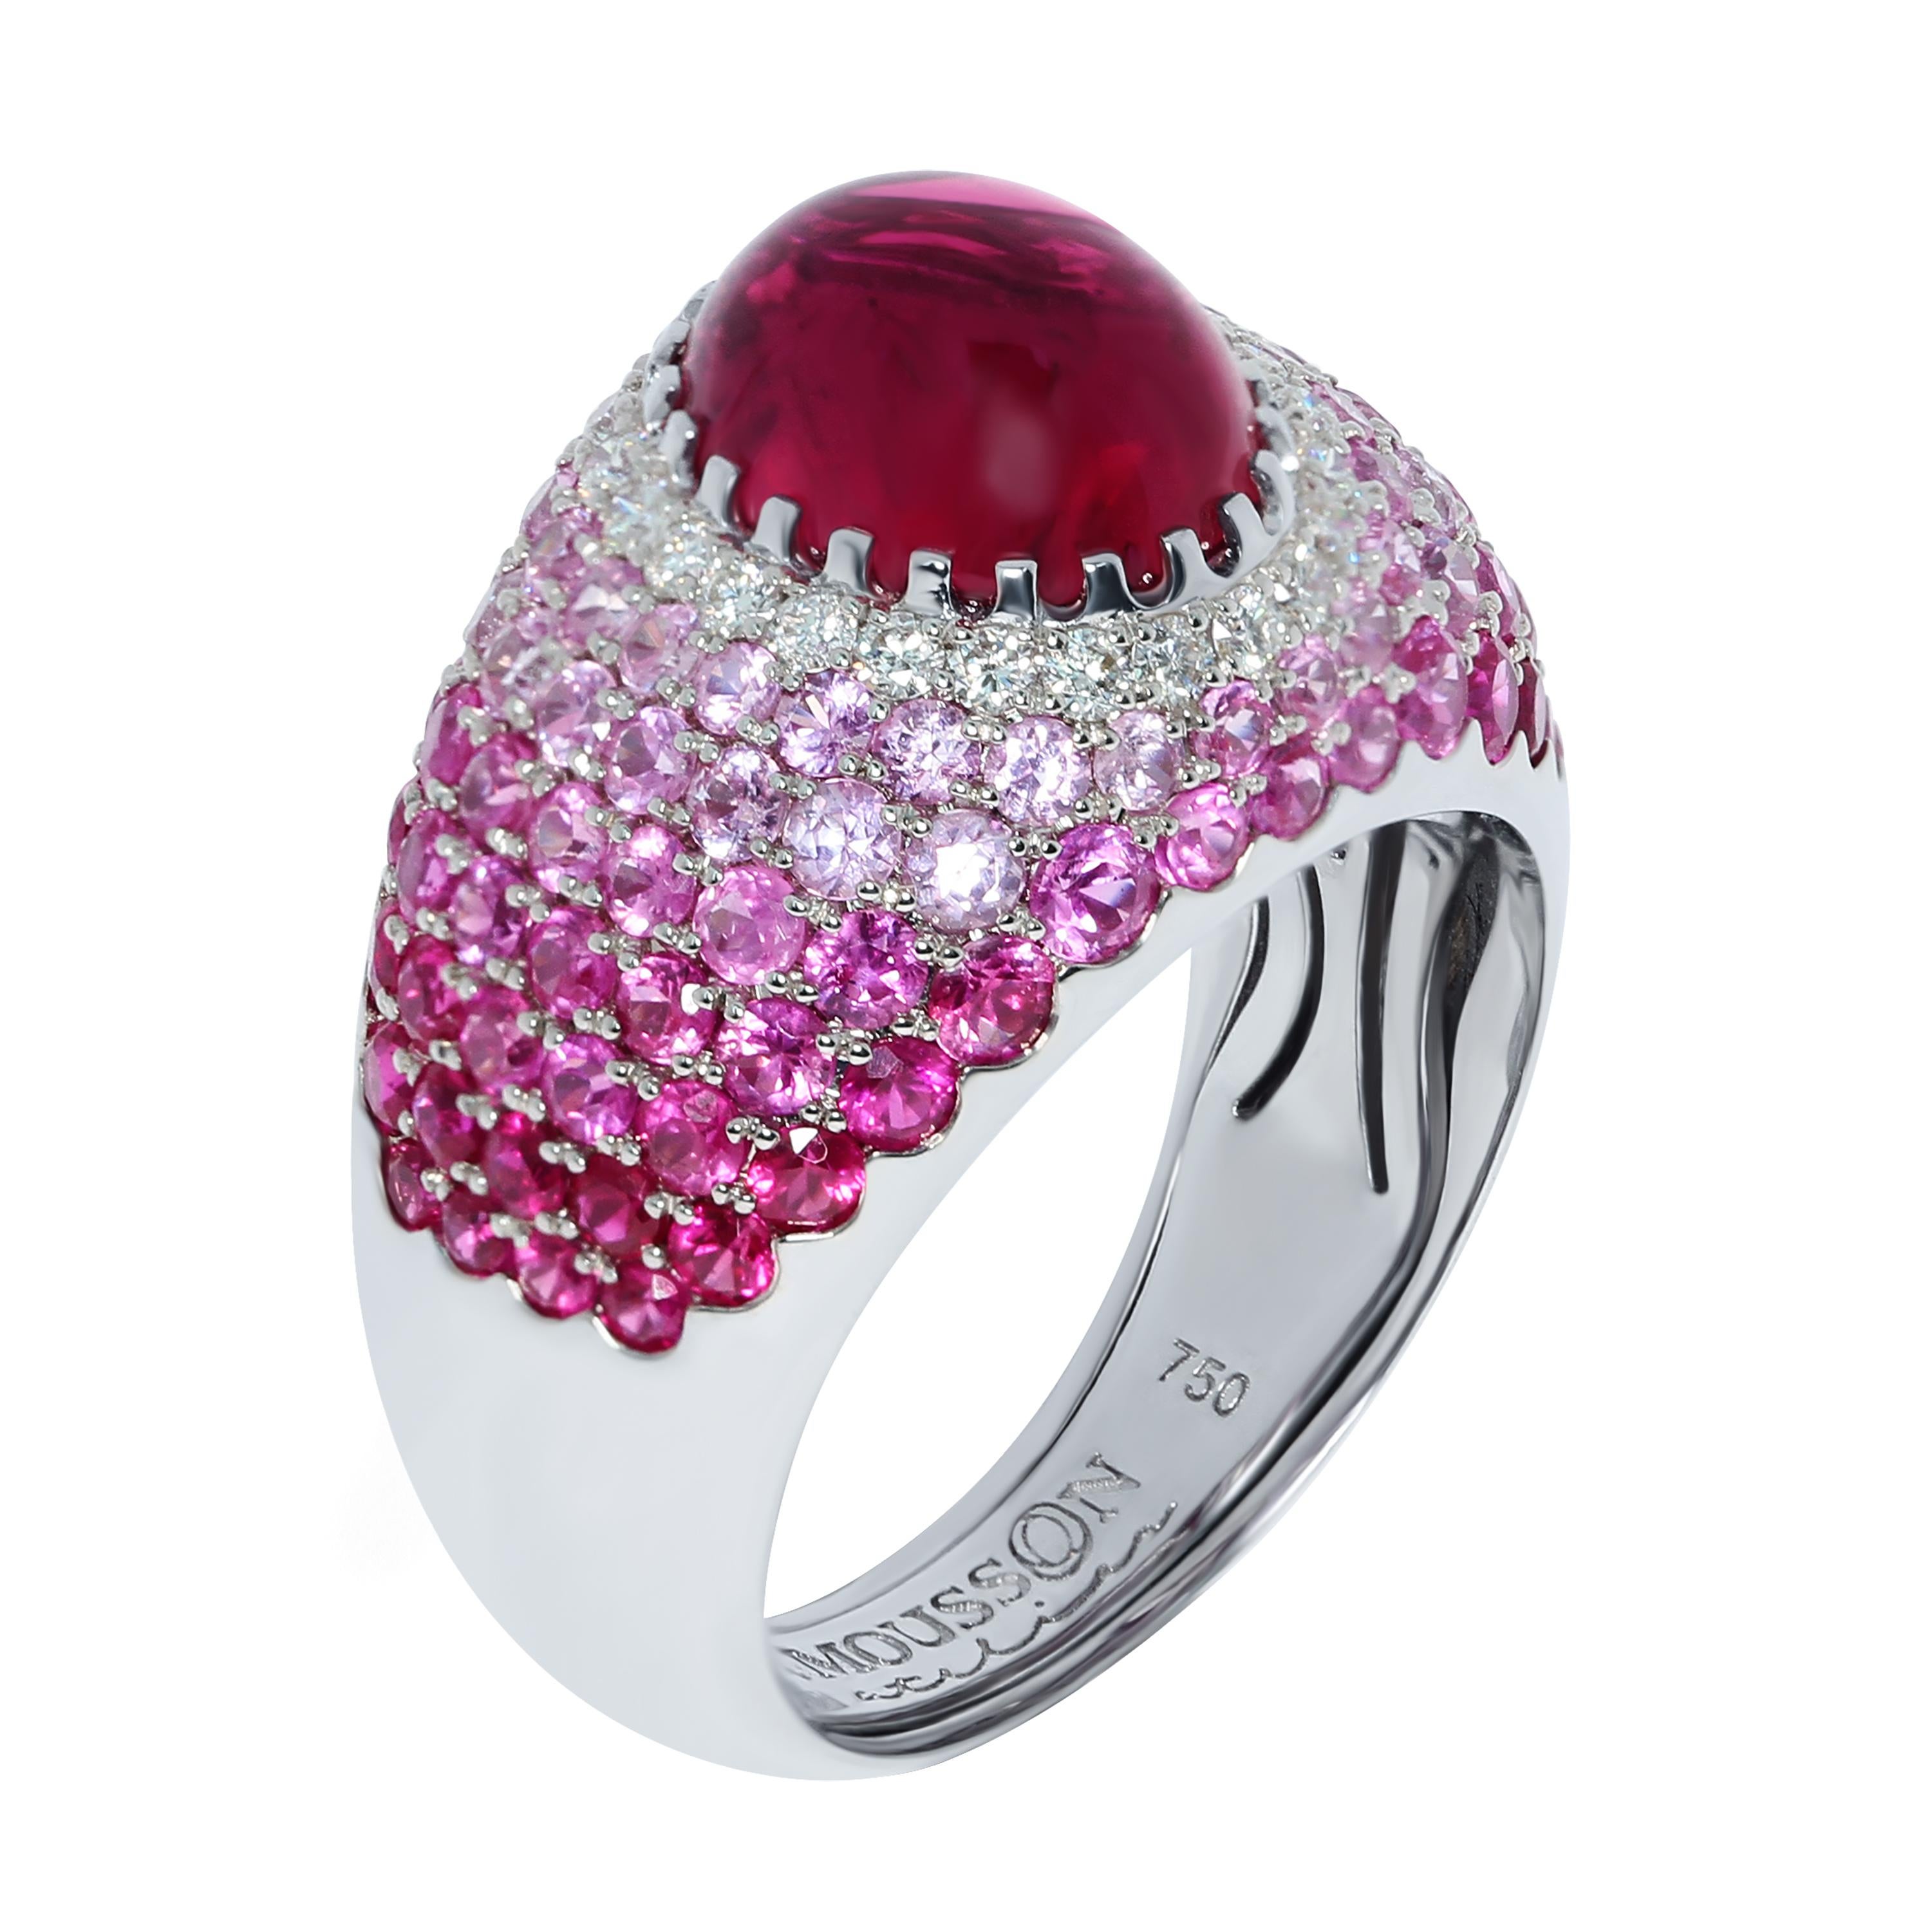 Rubelite 2.79 Carat Diamonds Rubies Sapphires White 18 Karat Gold Riviera Ring
The name and the variety of colours in this collection are associated with the bright Italian and French Riviera, vivid and colourful houses and sun reflections on the